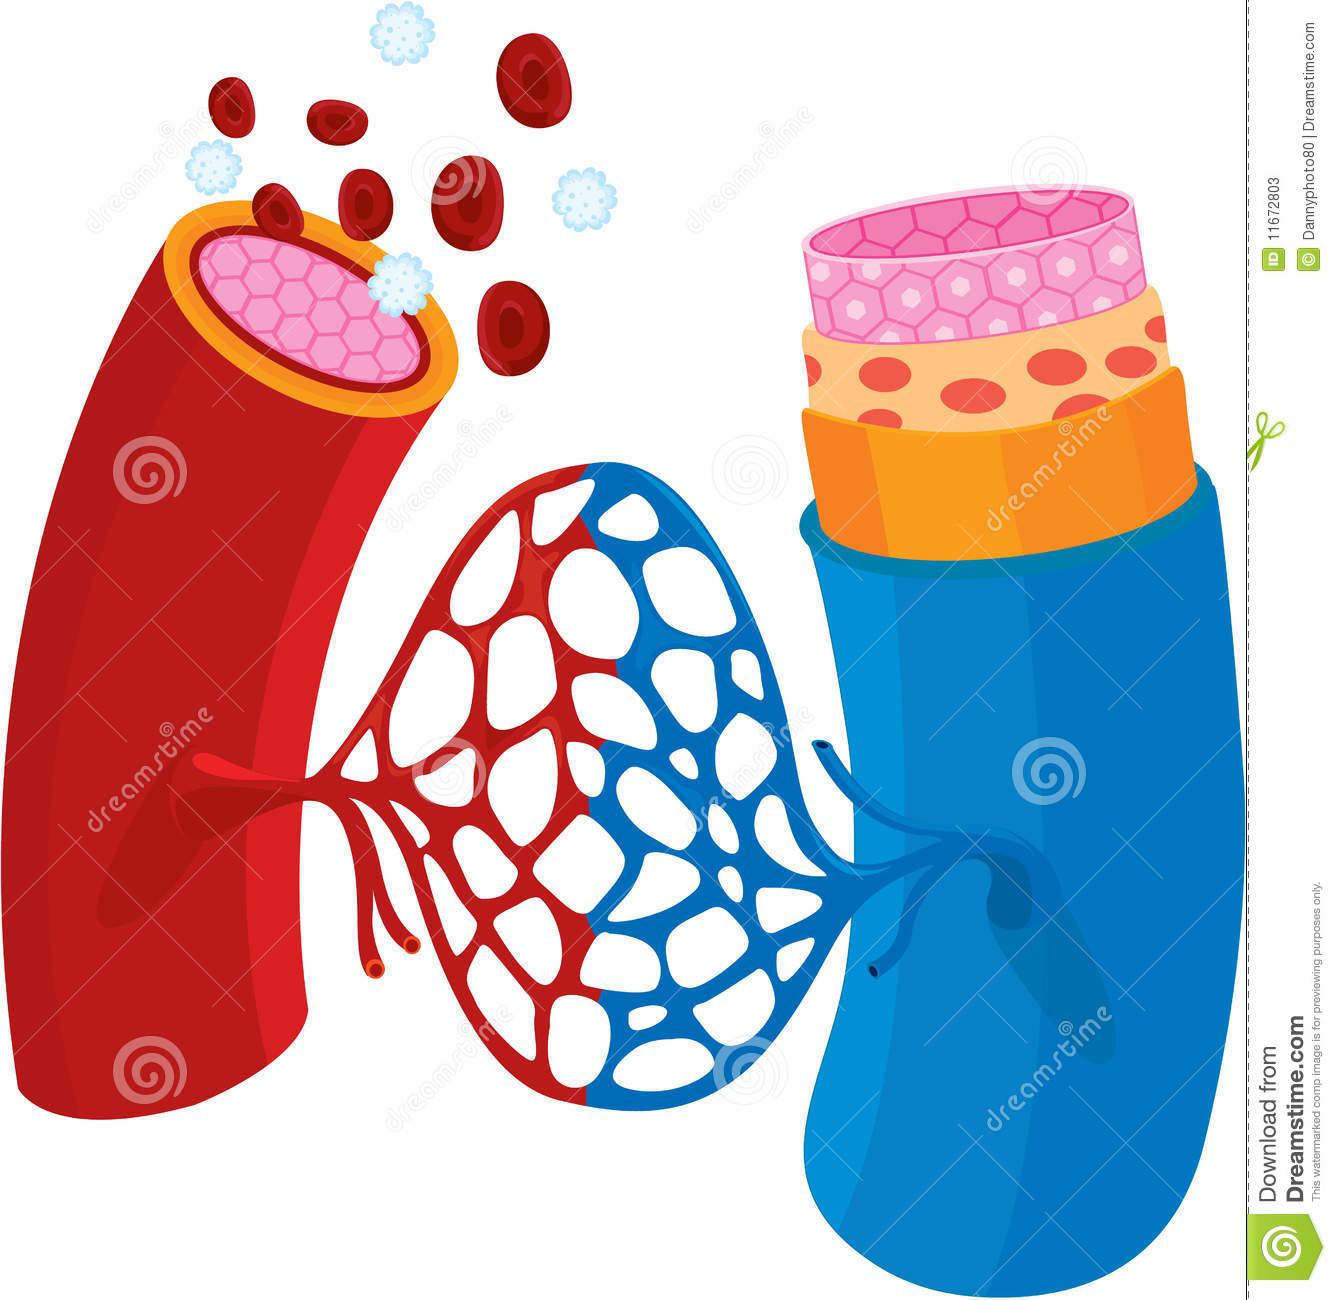 Blood Vessels Stock Photos   Image  11672803